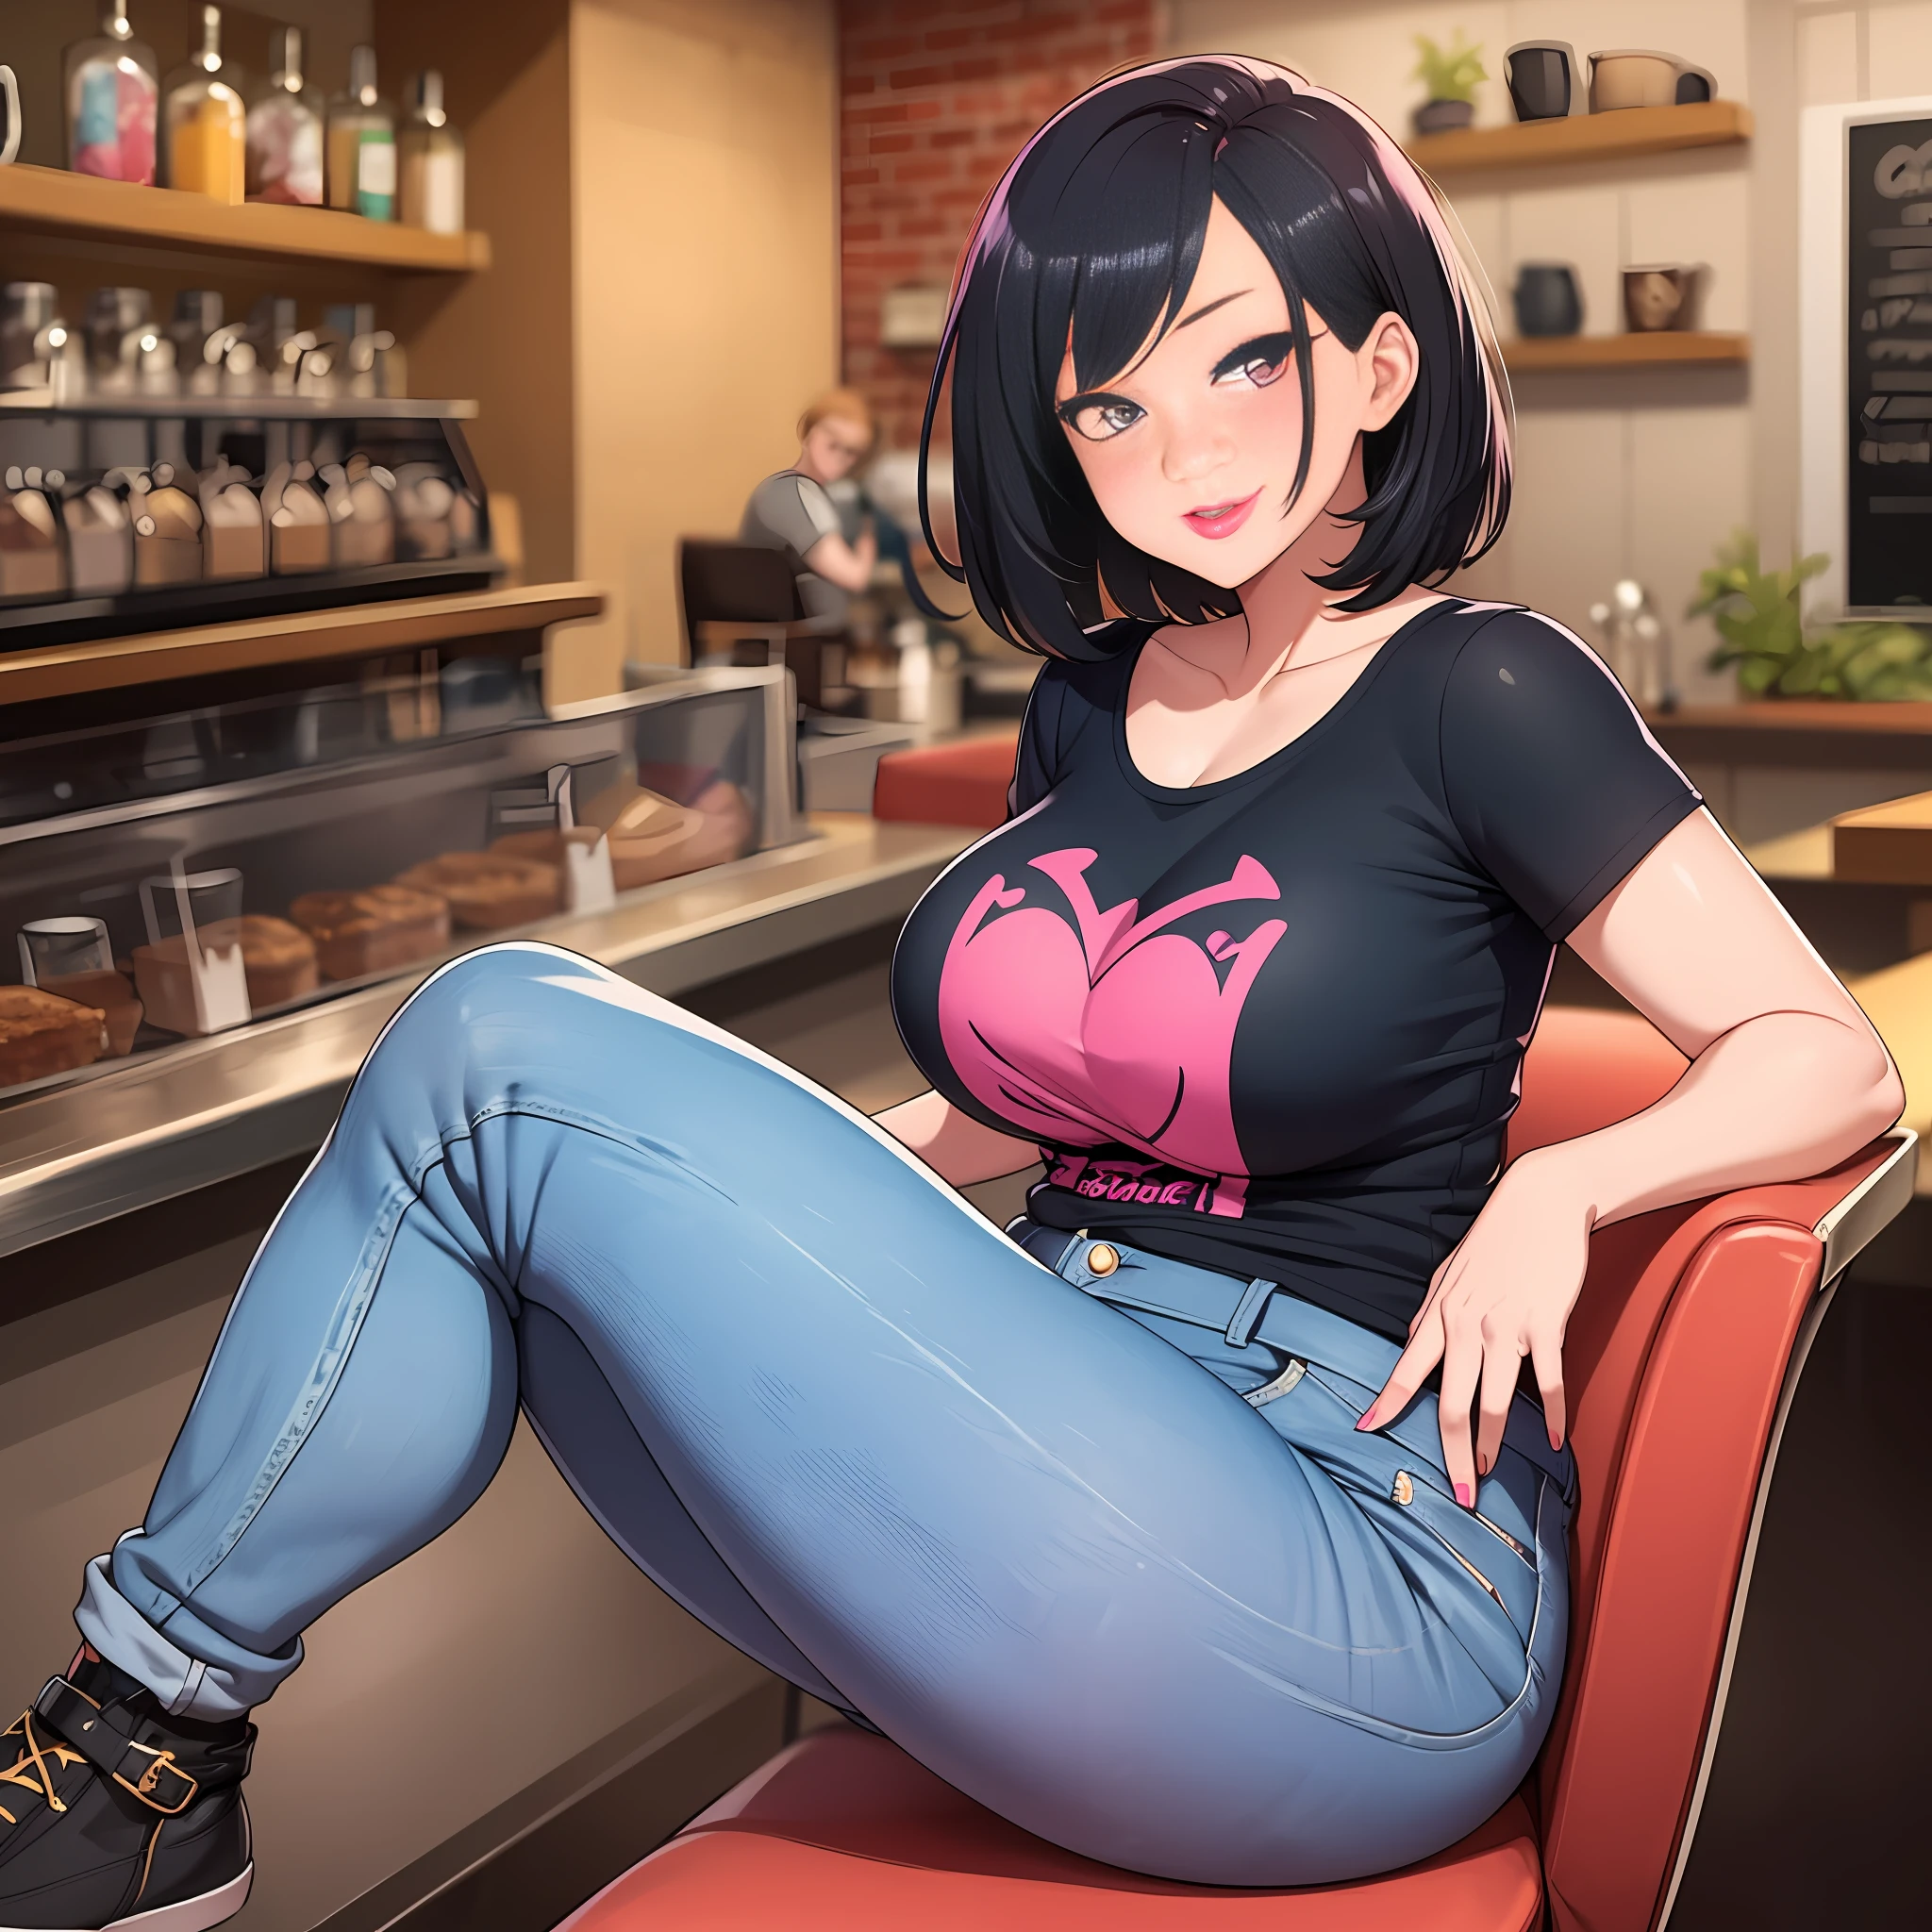 Milf, pink lipstick, short black hair, t-shirt, jeans, winking, looking at viewer, flirting, hourglass figure, coffee shop, sitting opposite of viewer, love hearts, blushing